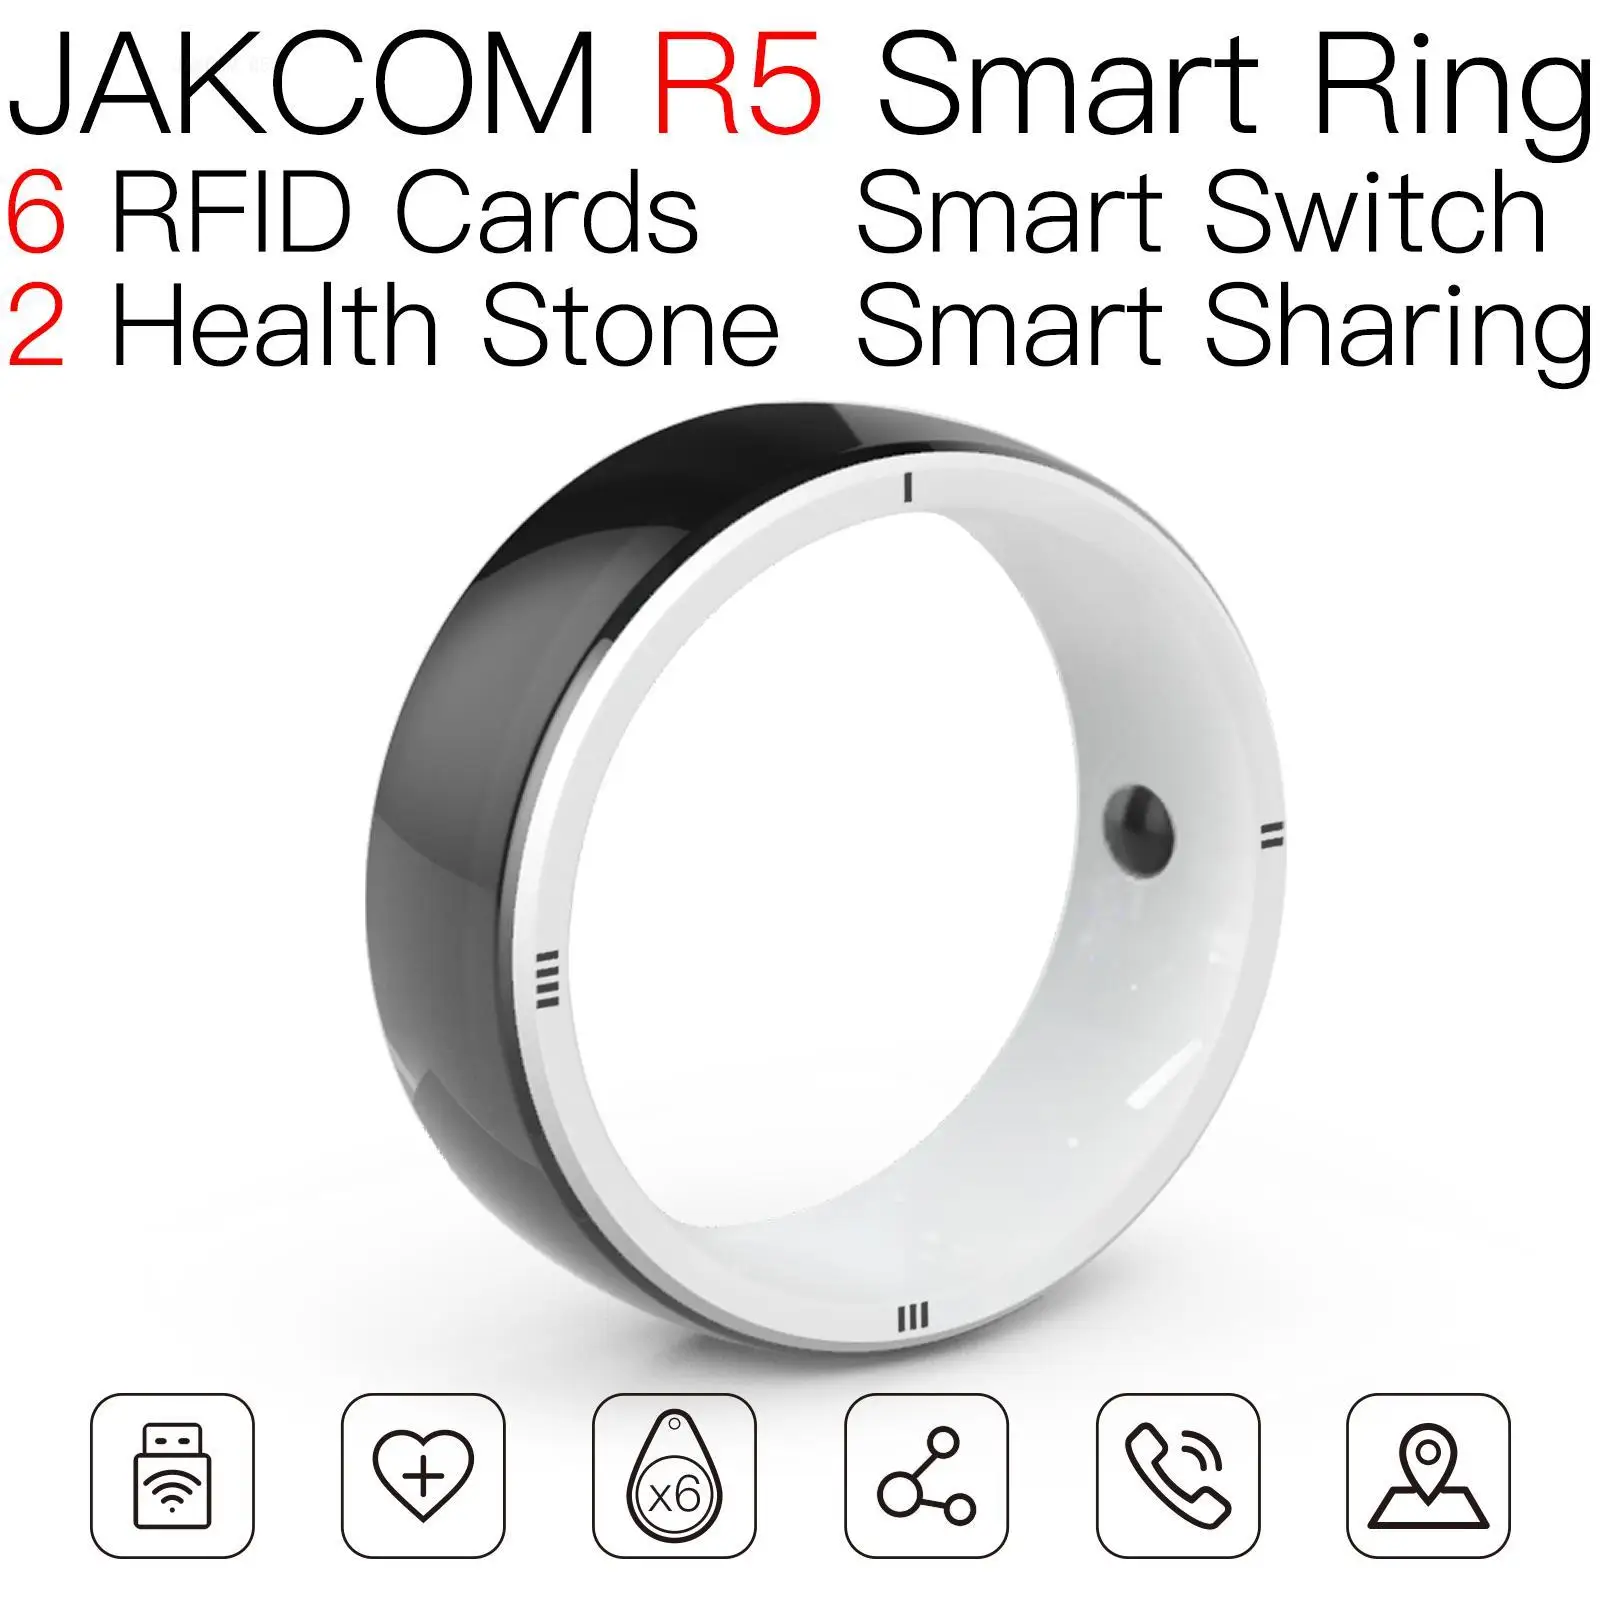 

JAKCOM R5 Smart Ring better than uhf rfid trash tag 860 nfc programmable android antenne 125khz antena stickers 50 215